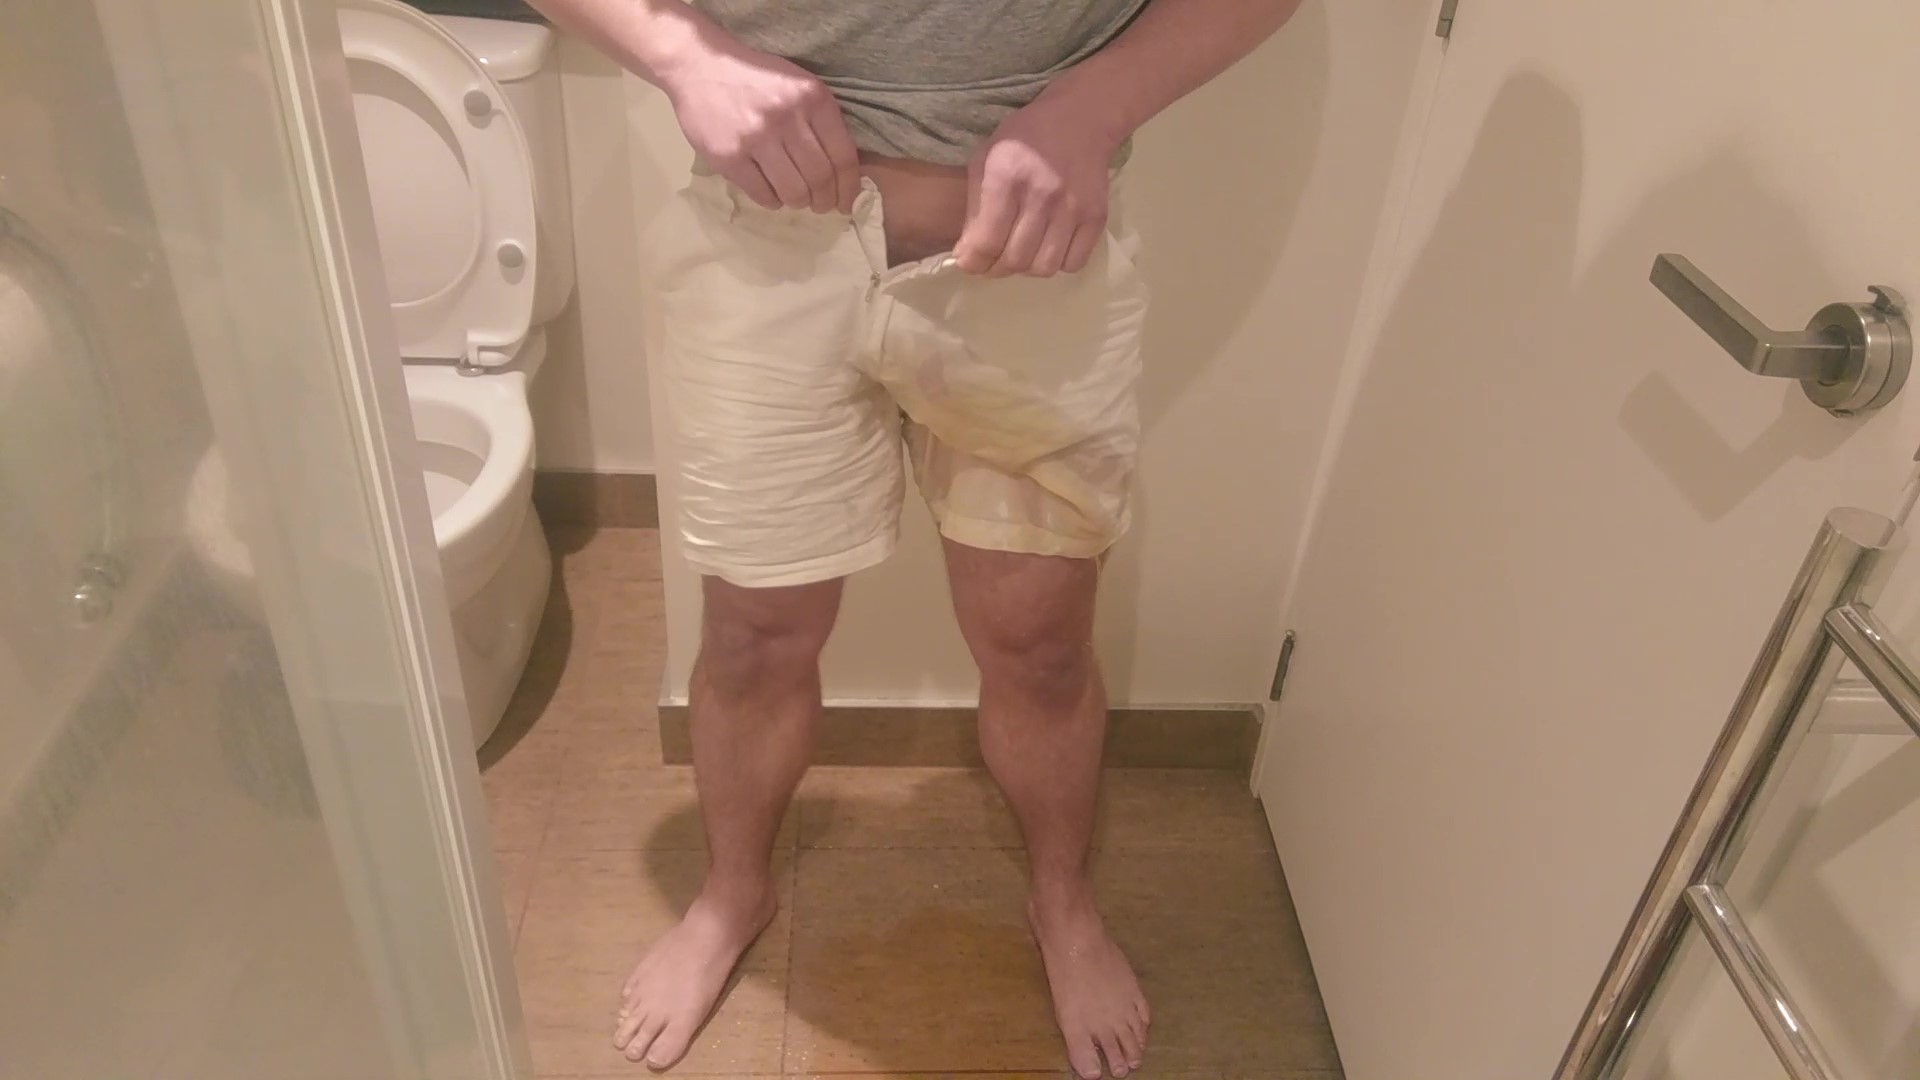 Pissing shorts after getting high